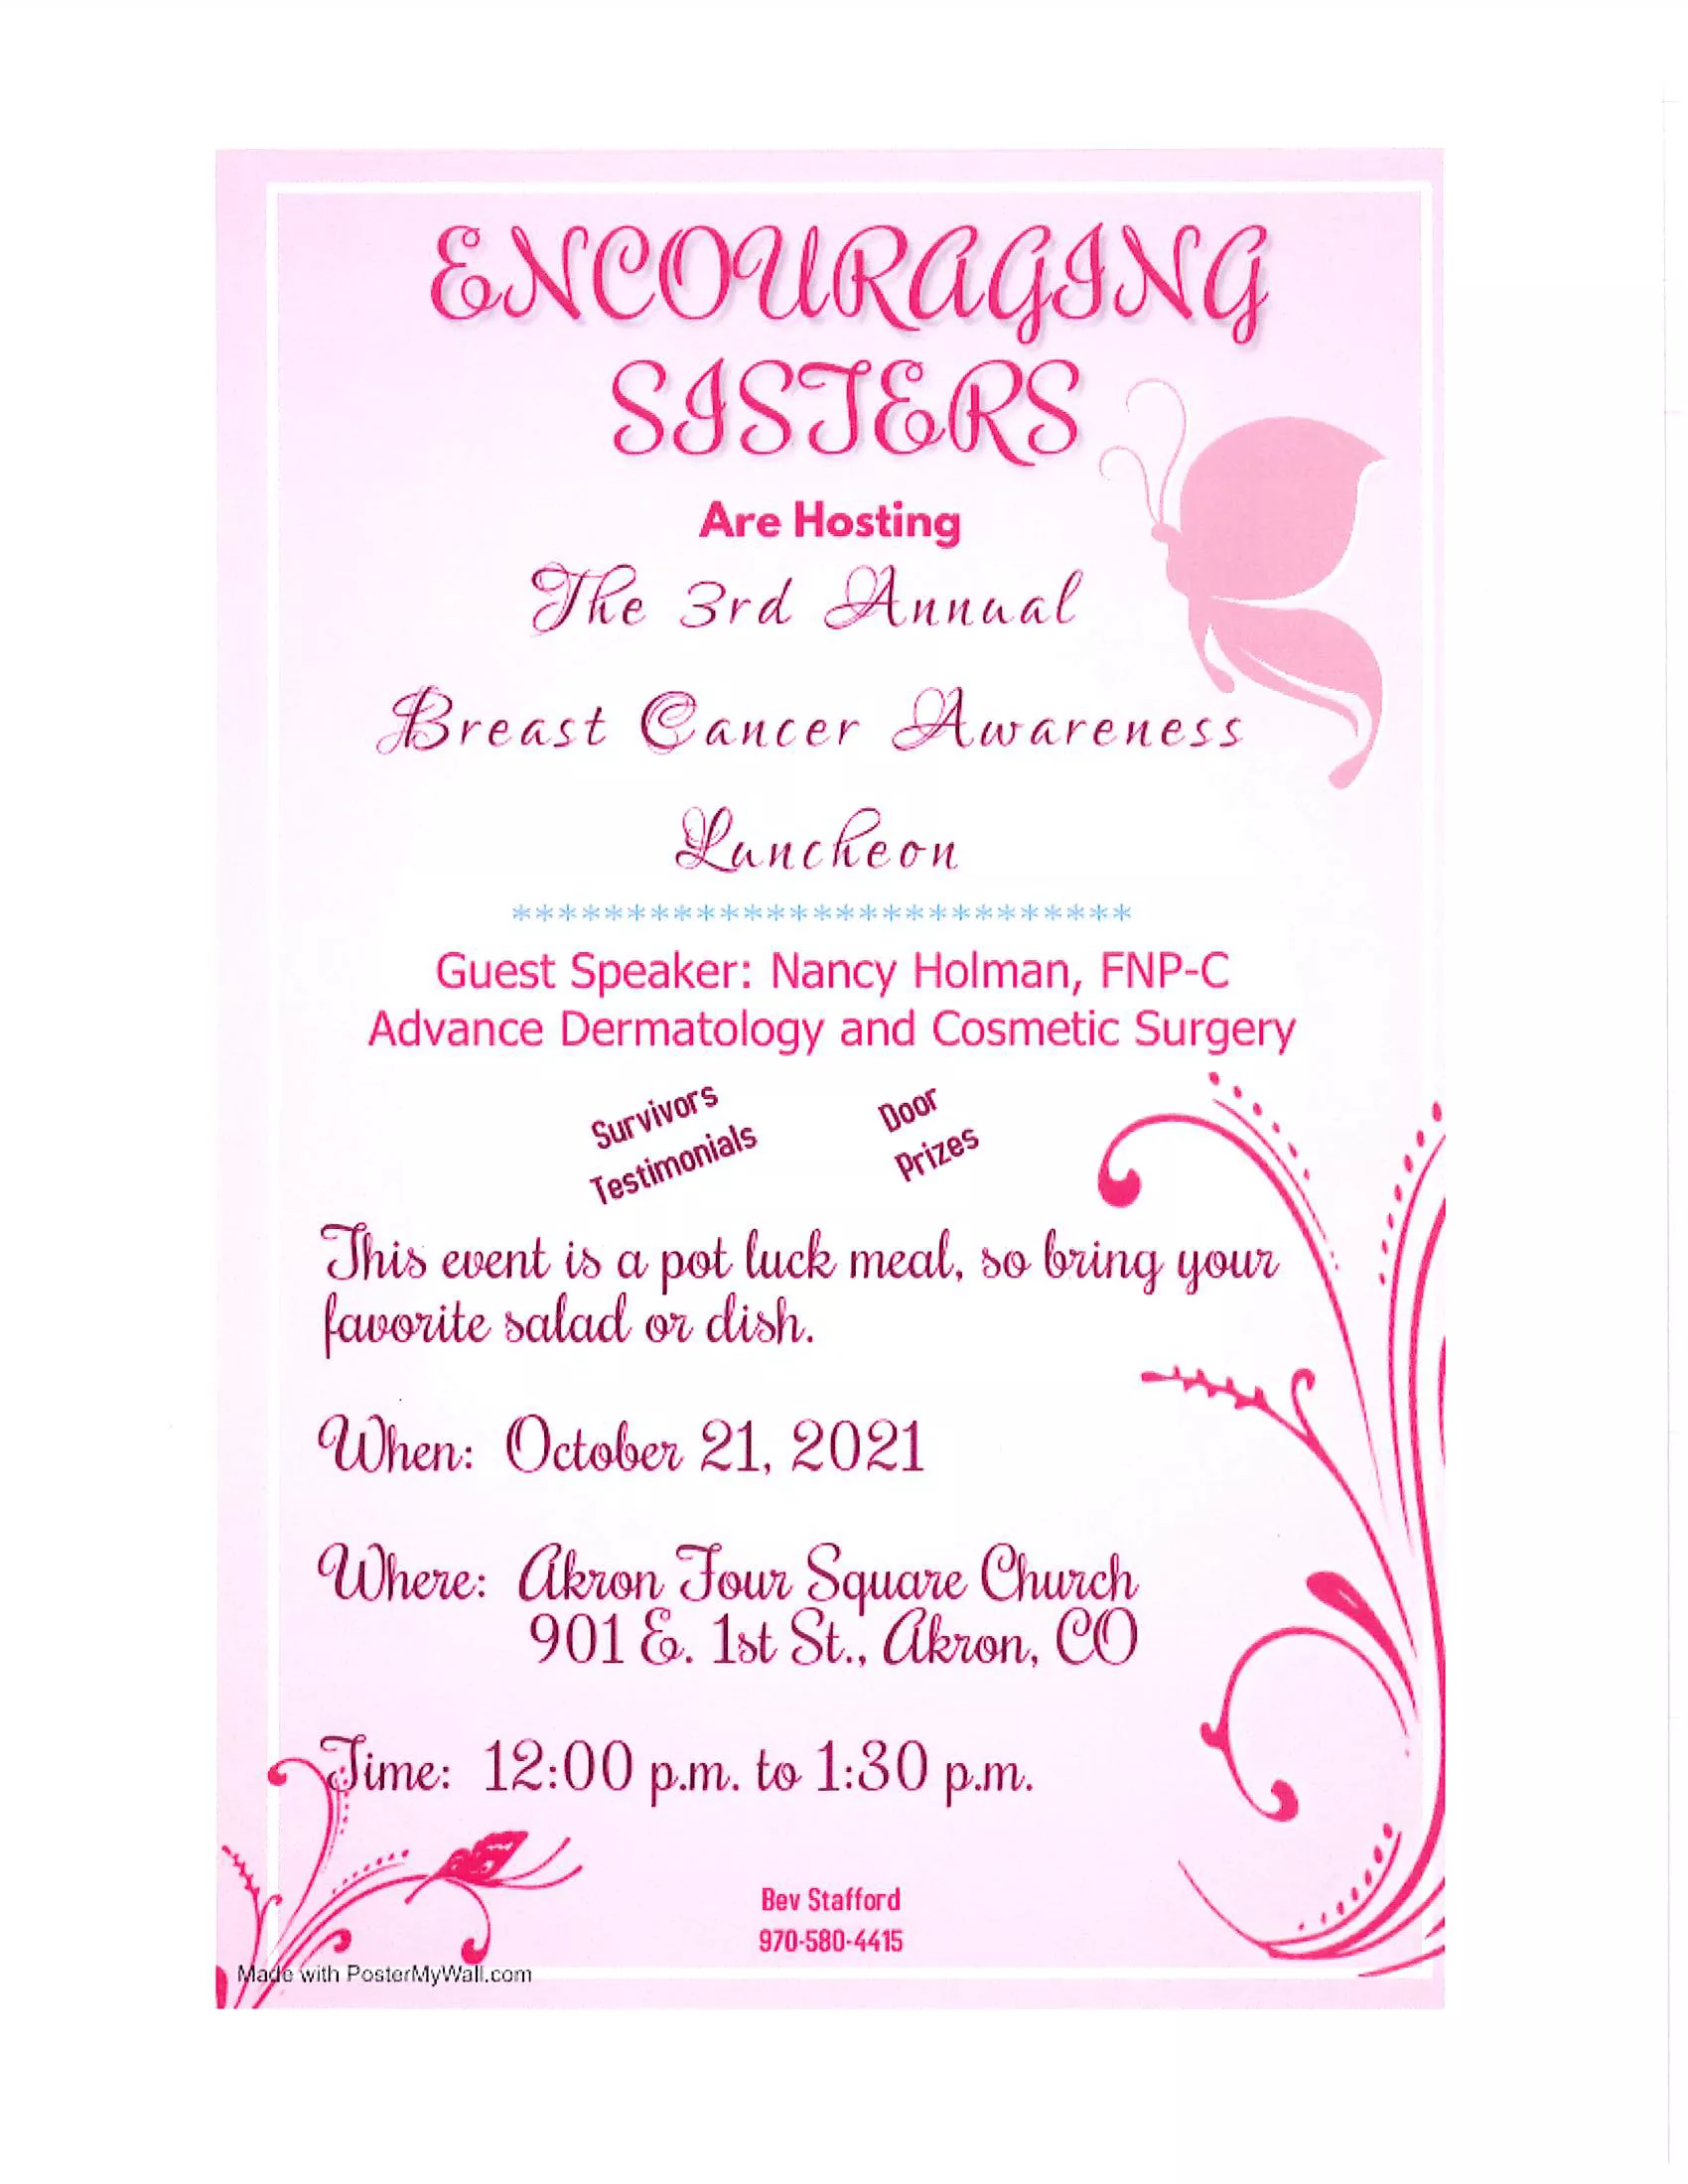 Breast Cancer Awareness Luncheon 10-21-21